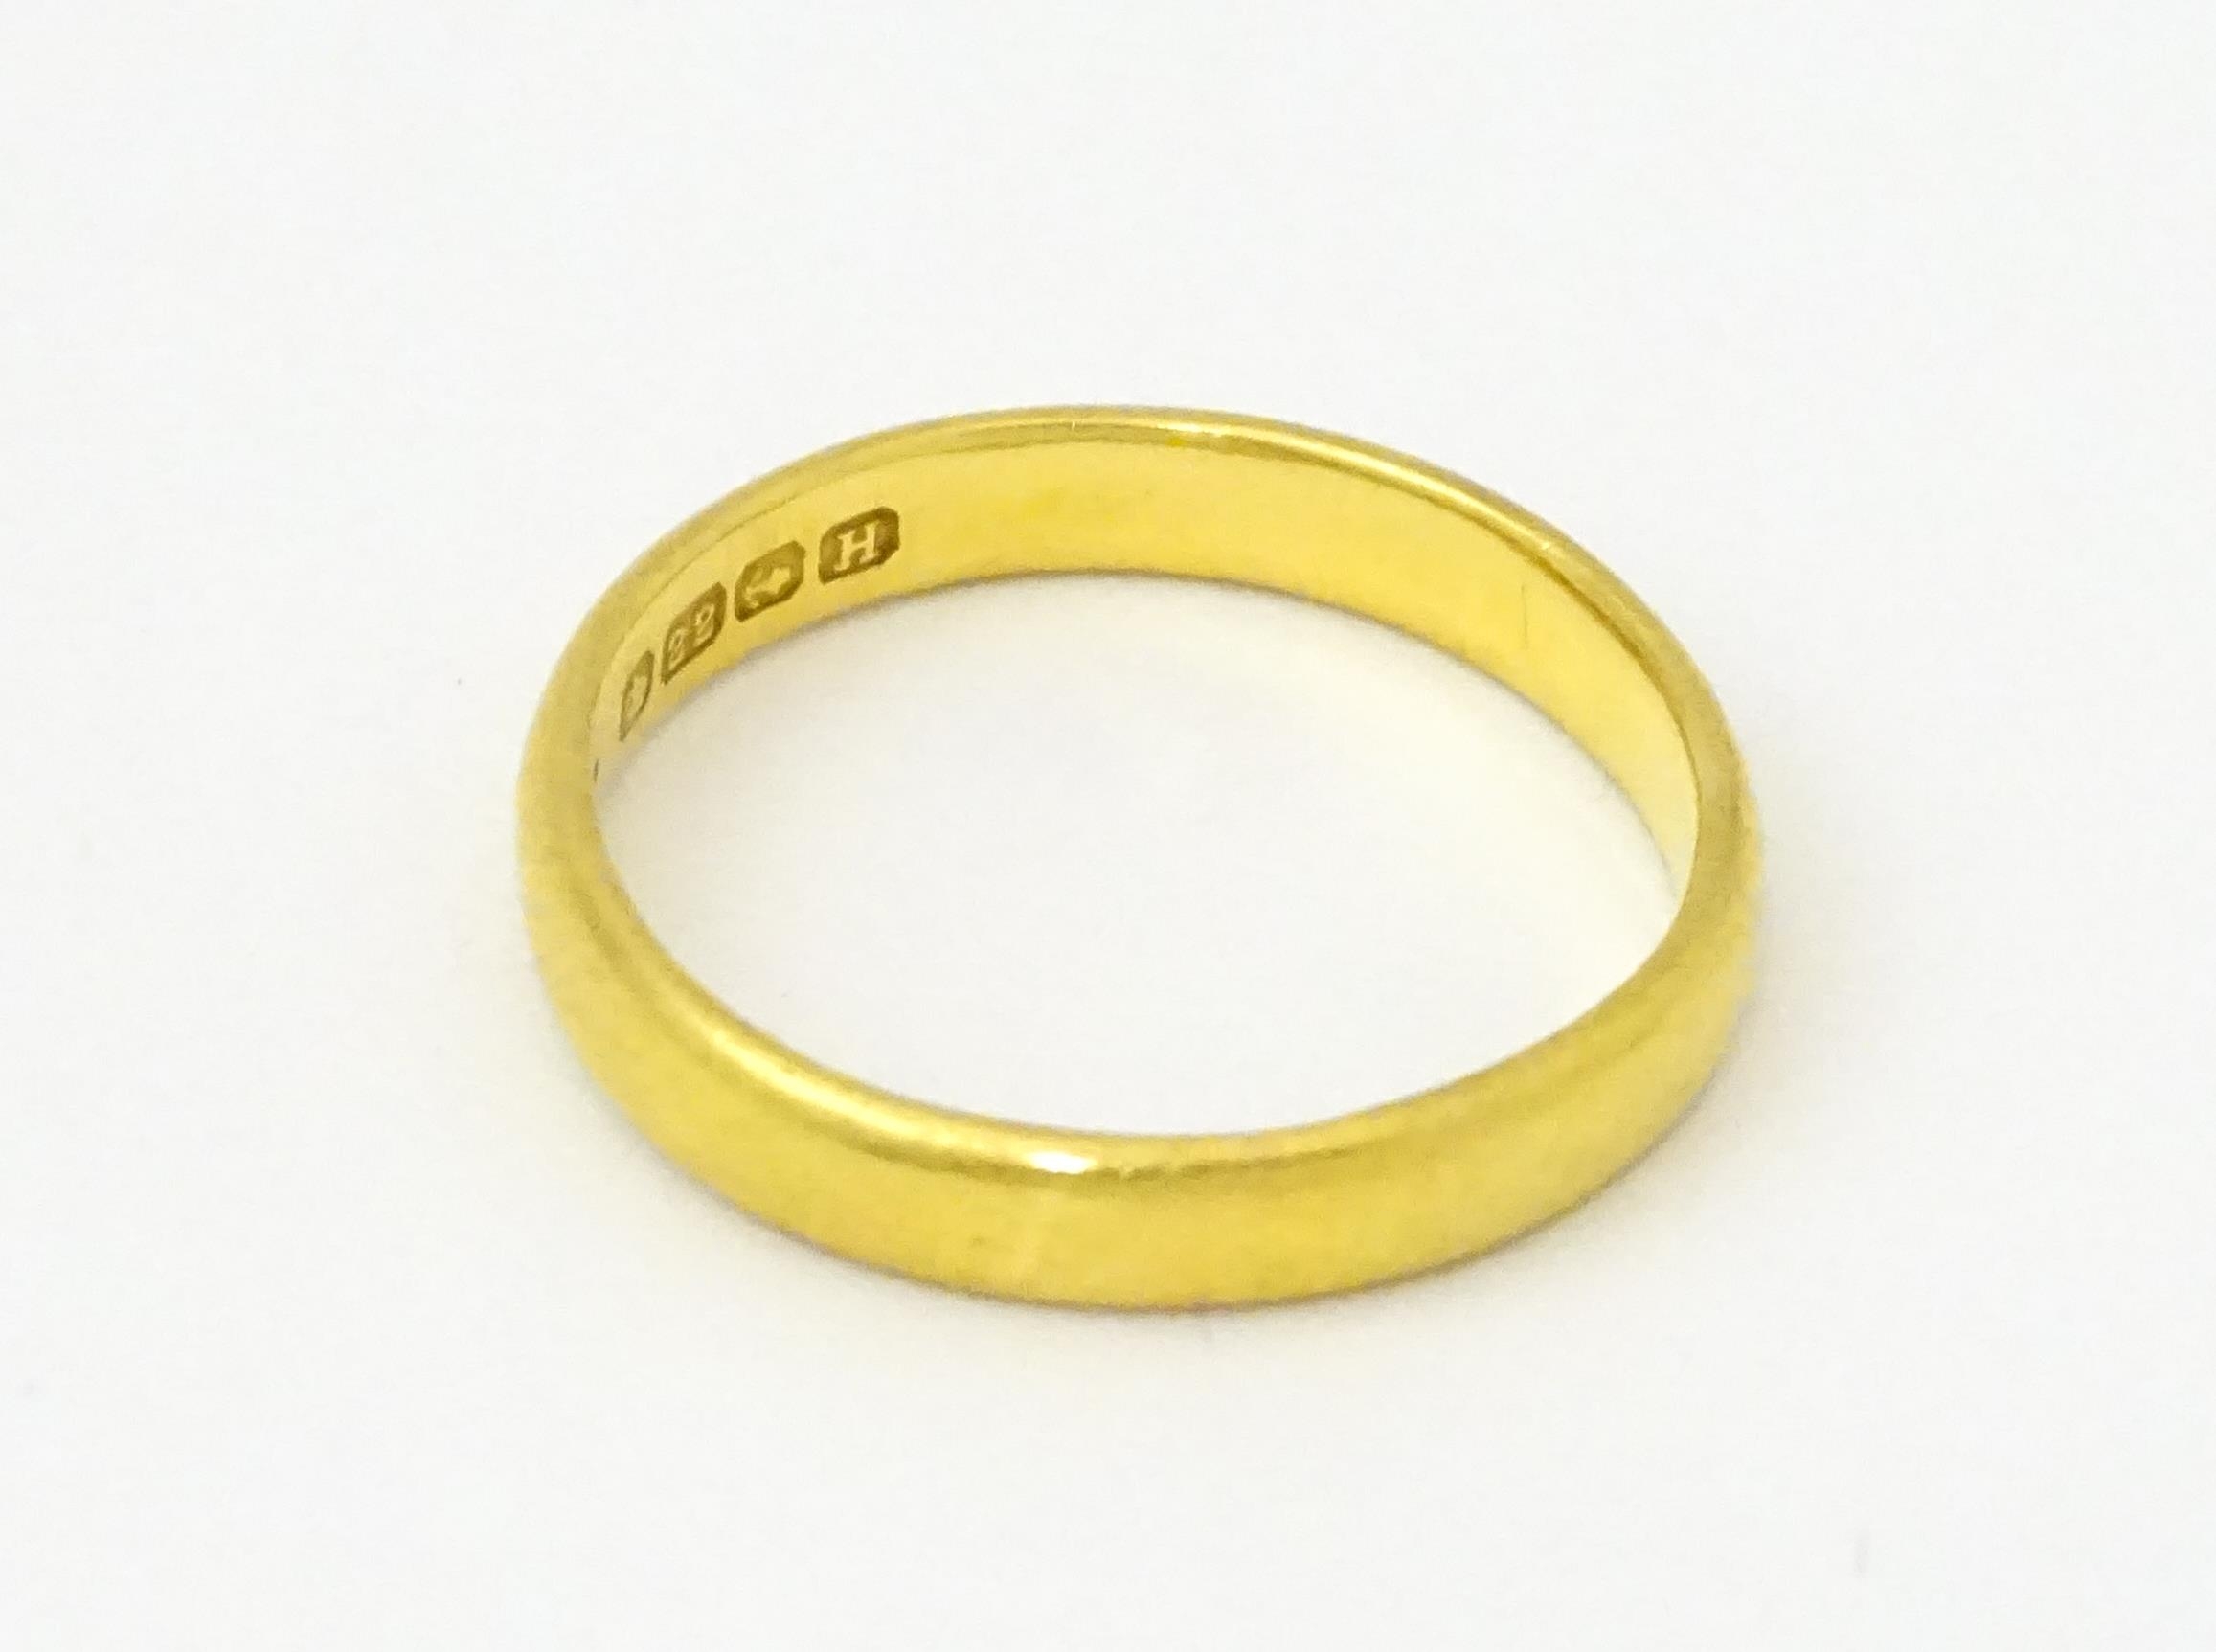 A 22ct gold ring / wedding band. Ring size approx. L 1/2 Please Note - we do not make reference to - Image 5 of 6